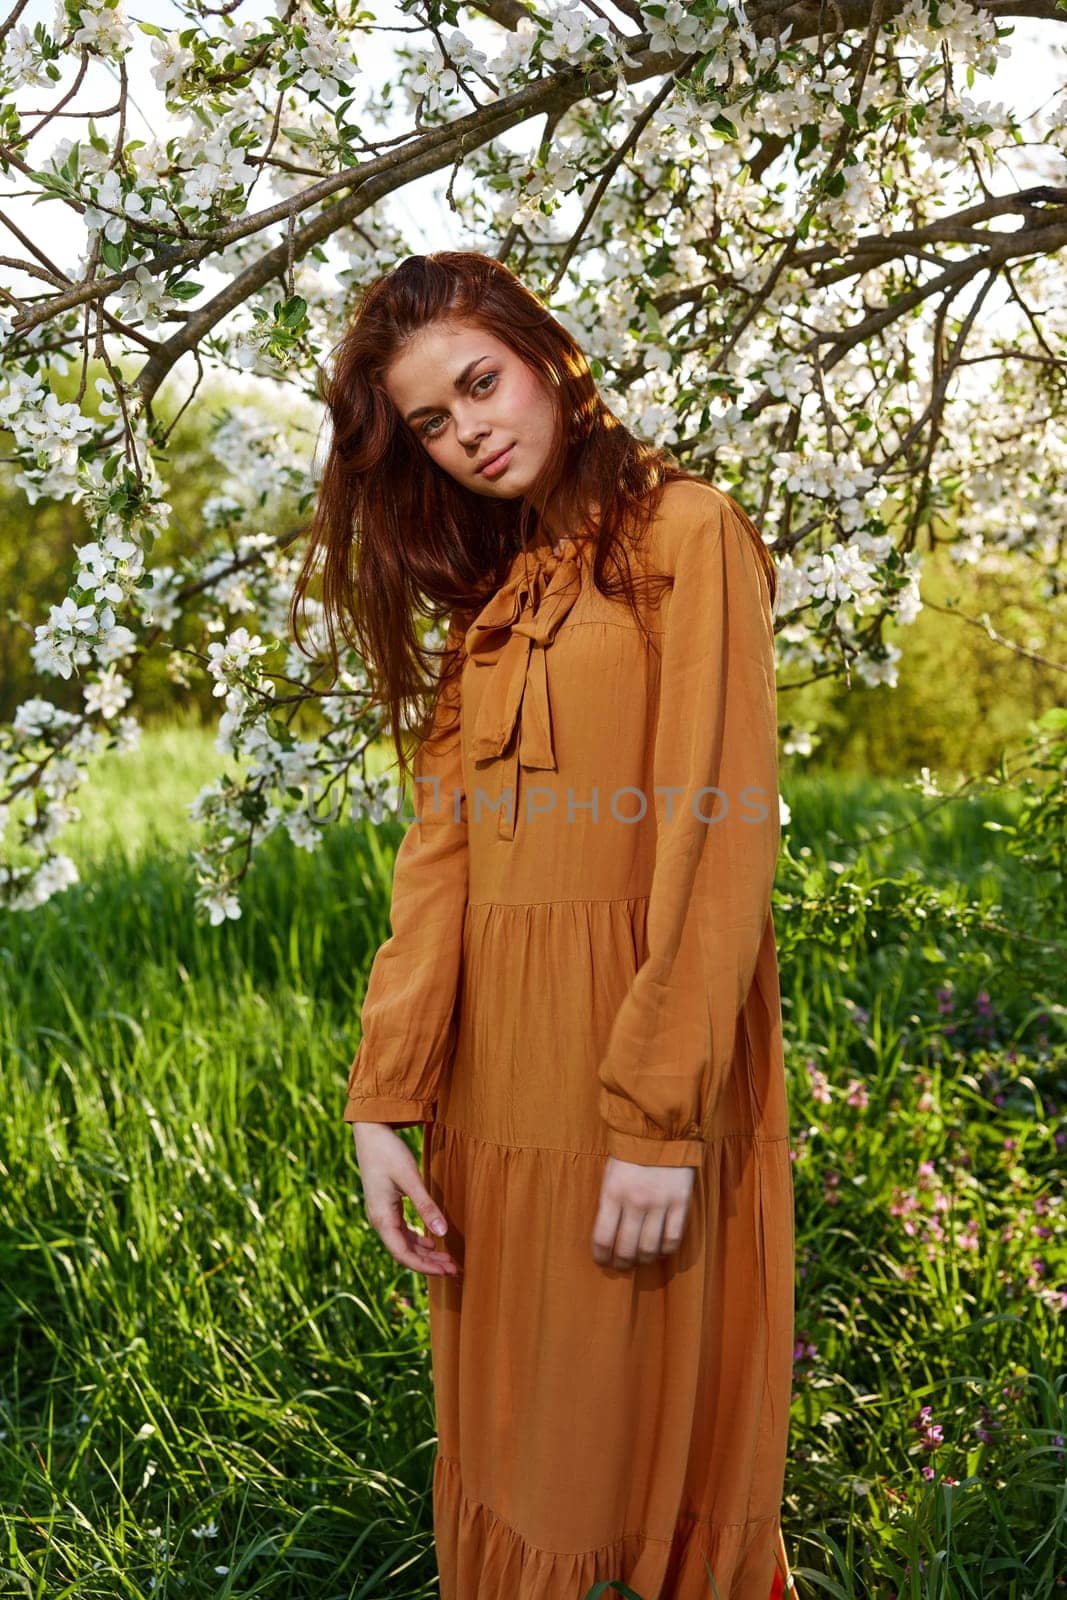 a bright vertical photo of an attractive woman in a long, stylish orange dress standing next to a flowering tree in sunny, warm weather, looking pleasantly into the camera, illuminated from the side by Vichizh